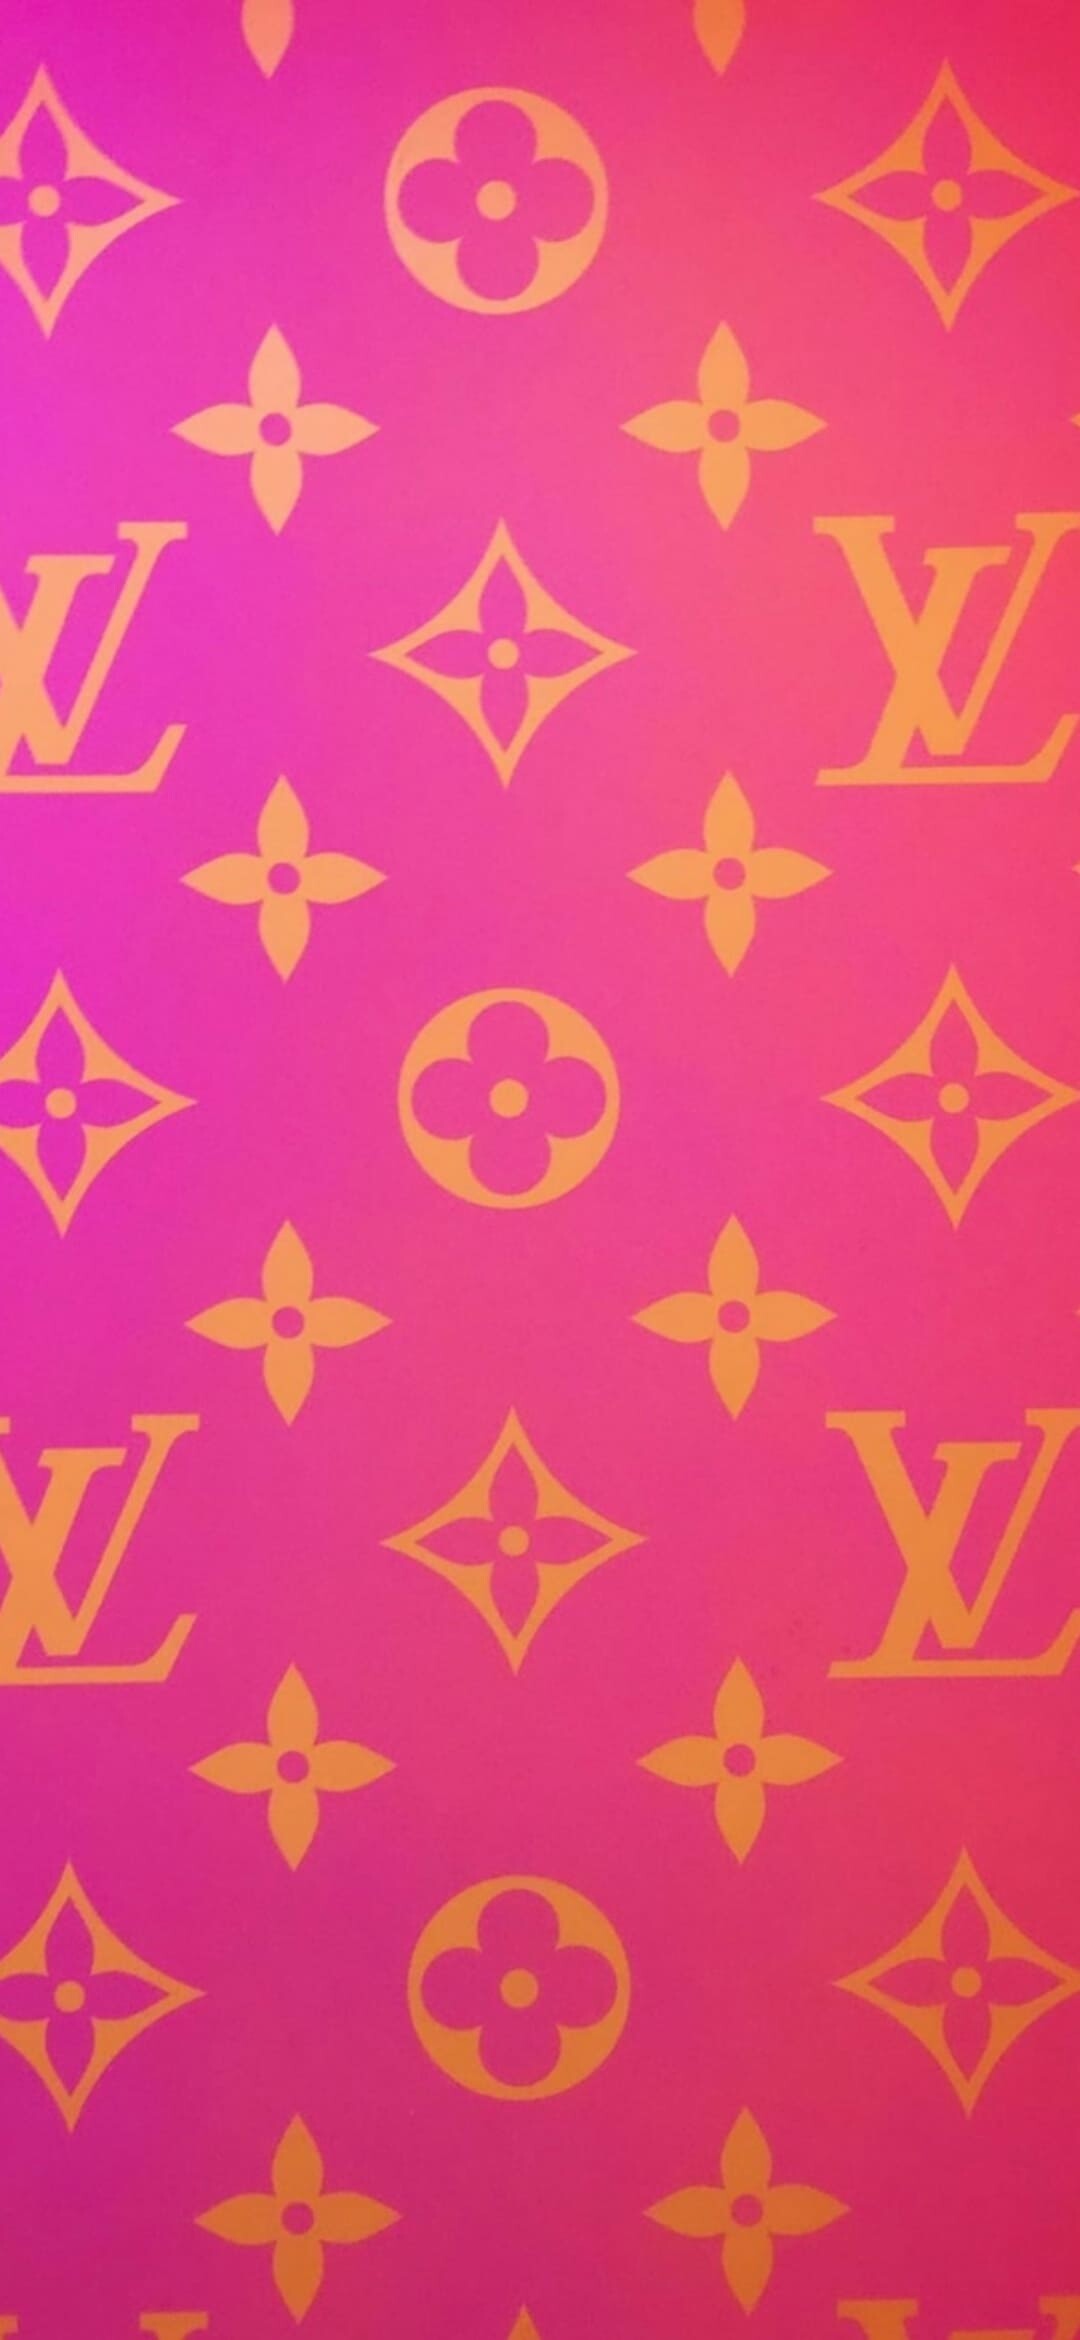 Louis Vuitton: Sells the products through standalone boutiques and lease departments in high-end departmental stores. 1080x2340 HD Background.